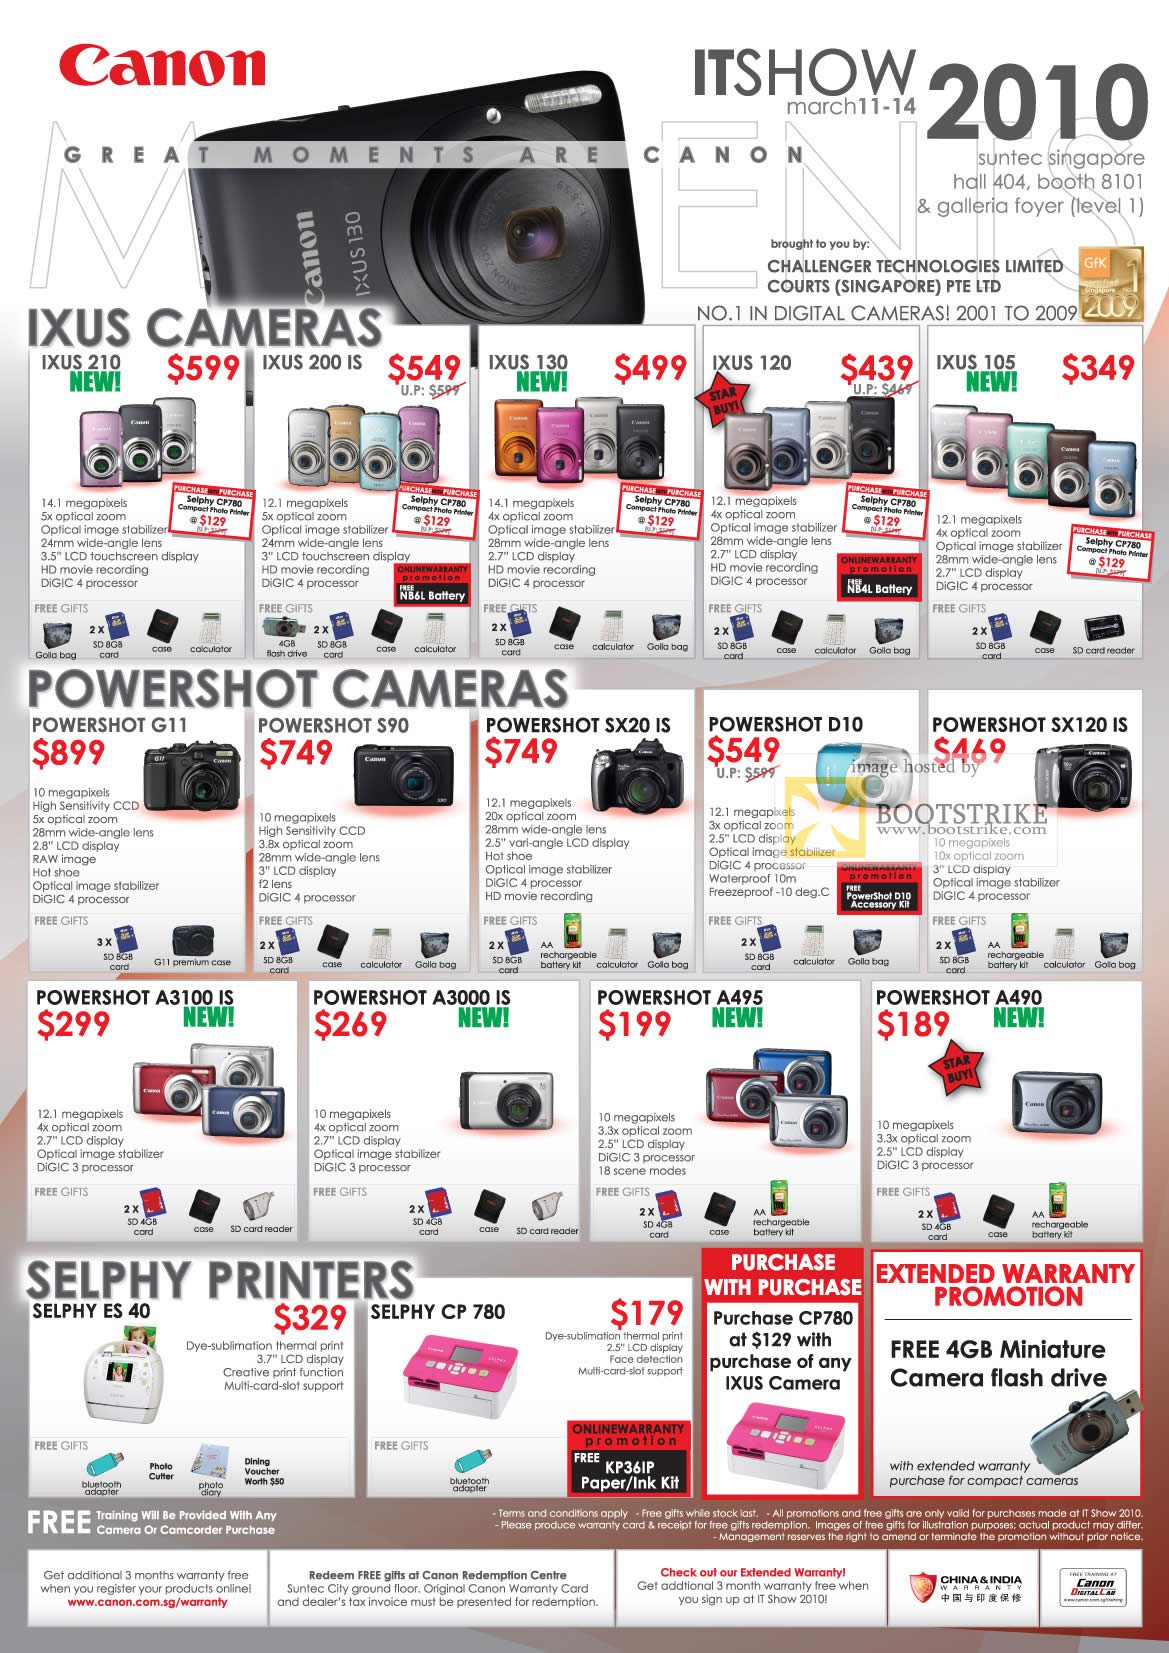 IT Show 2010 price list image brochure of Canon Digital Cameras Ixus 210 200 130 120 105 Powershot G11 S90 SX20 IS D10 SX120 A3100 A3000 A495 A490 Selphy Printers ES 40 CP 780